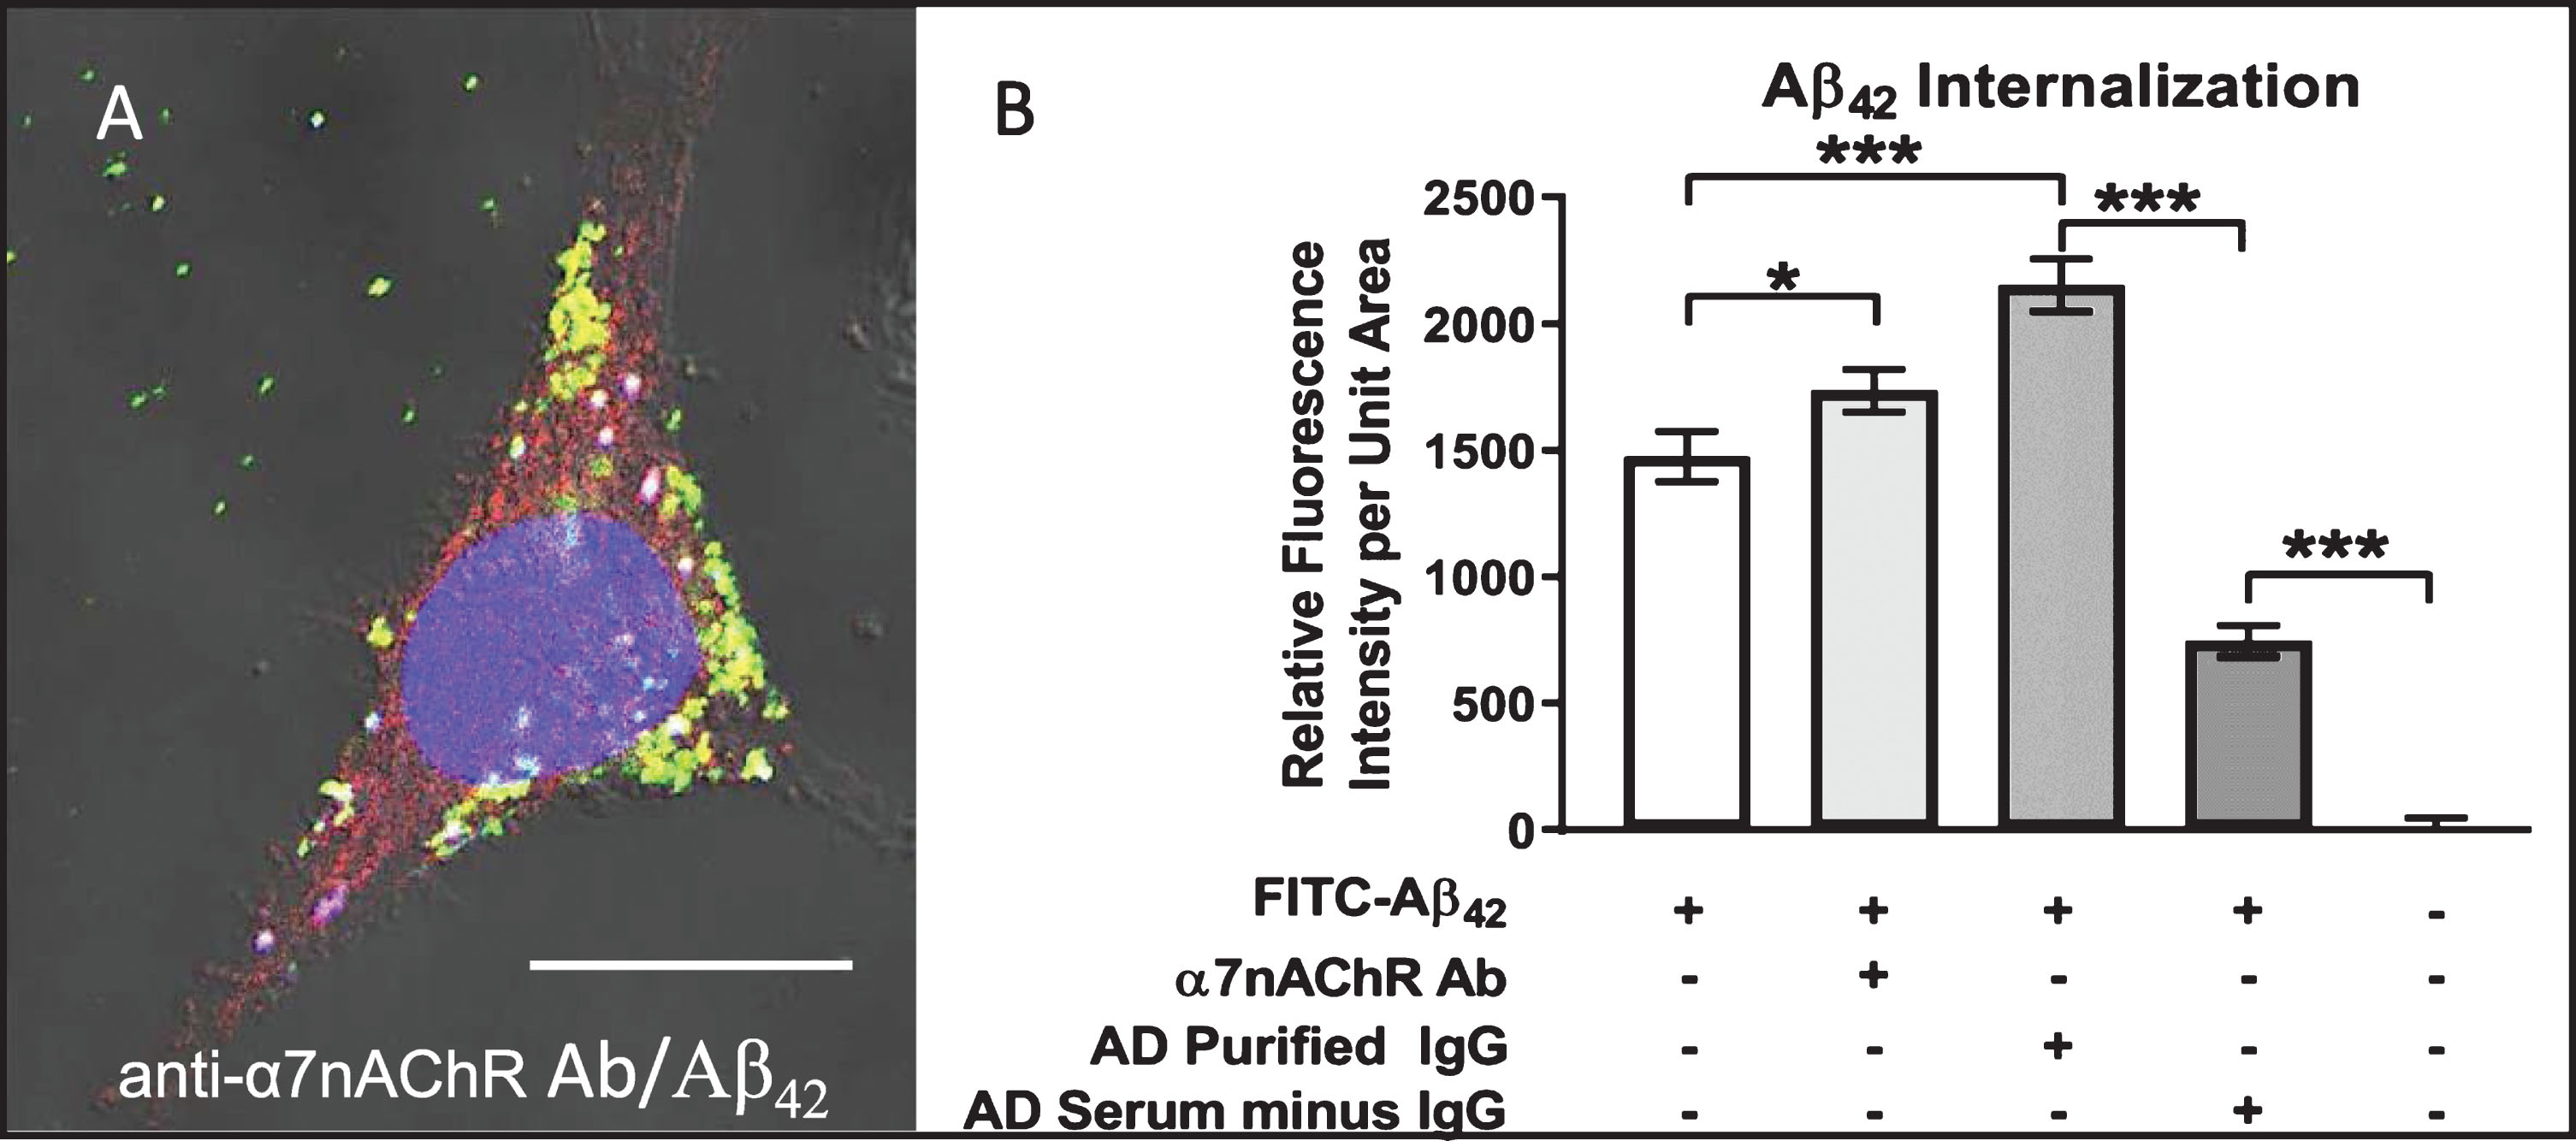 Aβ42 internalization is enhanced by anti-α7nAChR autoantibodies. Differentiated cell treated with 100 nM FITC-labeled (green) Aβ42 for 72 h in medium containing antibody directed against the α7nAChR and visualized using Cy3 (red) secondary antibodies. FITC-Aβ42 internalization was enhanced over that in cells treated with FITC-Aβ42 alone, and nearly all was co-localized with α7nAChR (yellow) either in small dispersed granules or uniform clusters of these granules. A) Cell treated for 72 h in medium containing both FITC-Aβ42 and serum from an AD patient showing extensive FITC-Aβ42 internalization and co-localization with α7nAChR. B) Quantification showing increased Aβ42 internalization in cells treated with anti-α7nAChR antibody over those exposed to FITC-Aβ42 alone. Cells treated with IgG purified from AD serum showed a higher level of FITC-Aβ42 internalization than those treated with anti-α7nAChR. Removal of IgG from AD serum caused a dramatic reduction in Aβ42 internalization. Scale bar = 10 μm. *p < 0.05, ***p < 0.001. AD, Alzheimer’s disease serum.